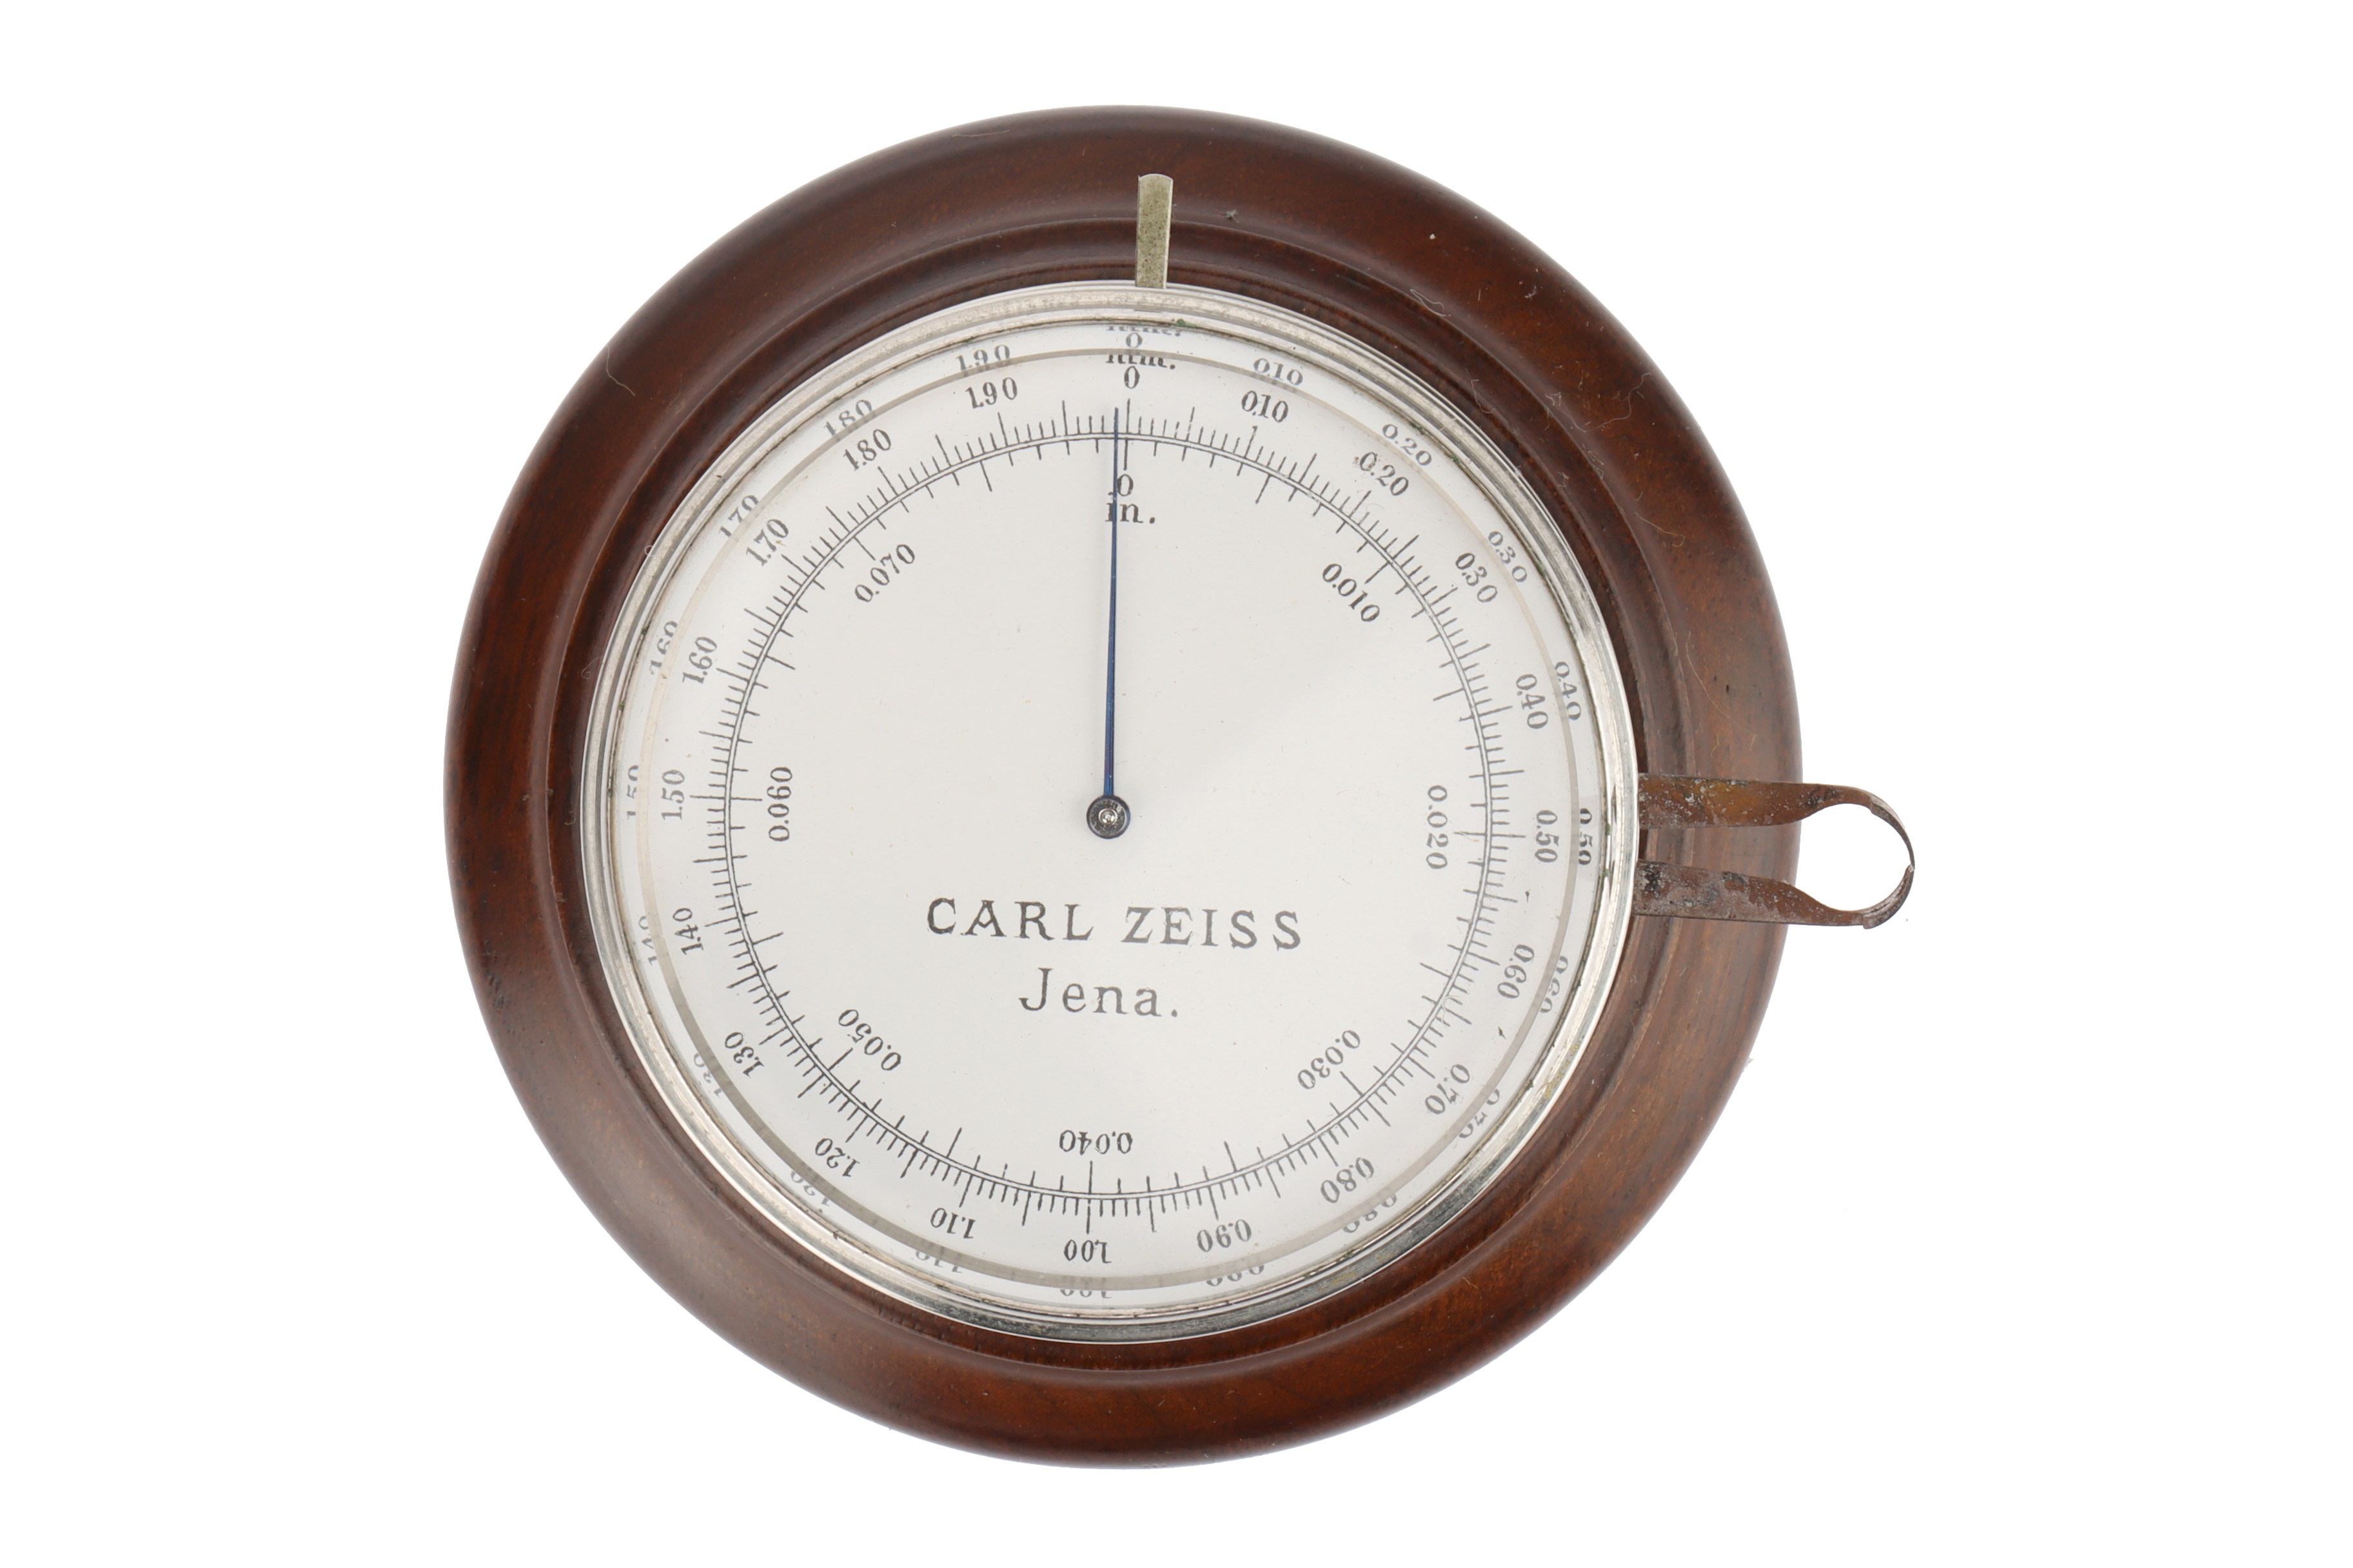 Cover Glass Gauge, Carl Zeiss, Jena, - Image 2 of 3